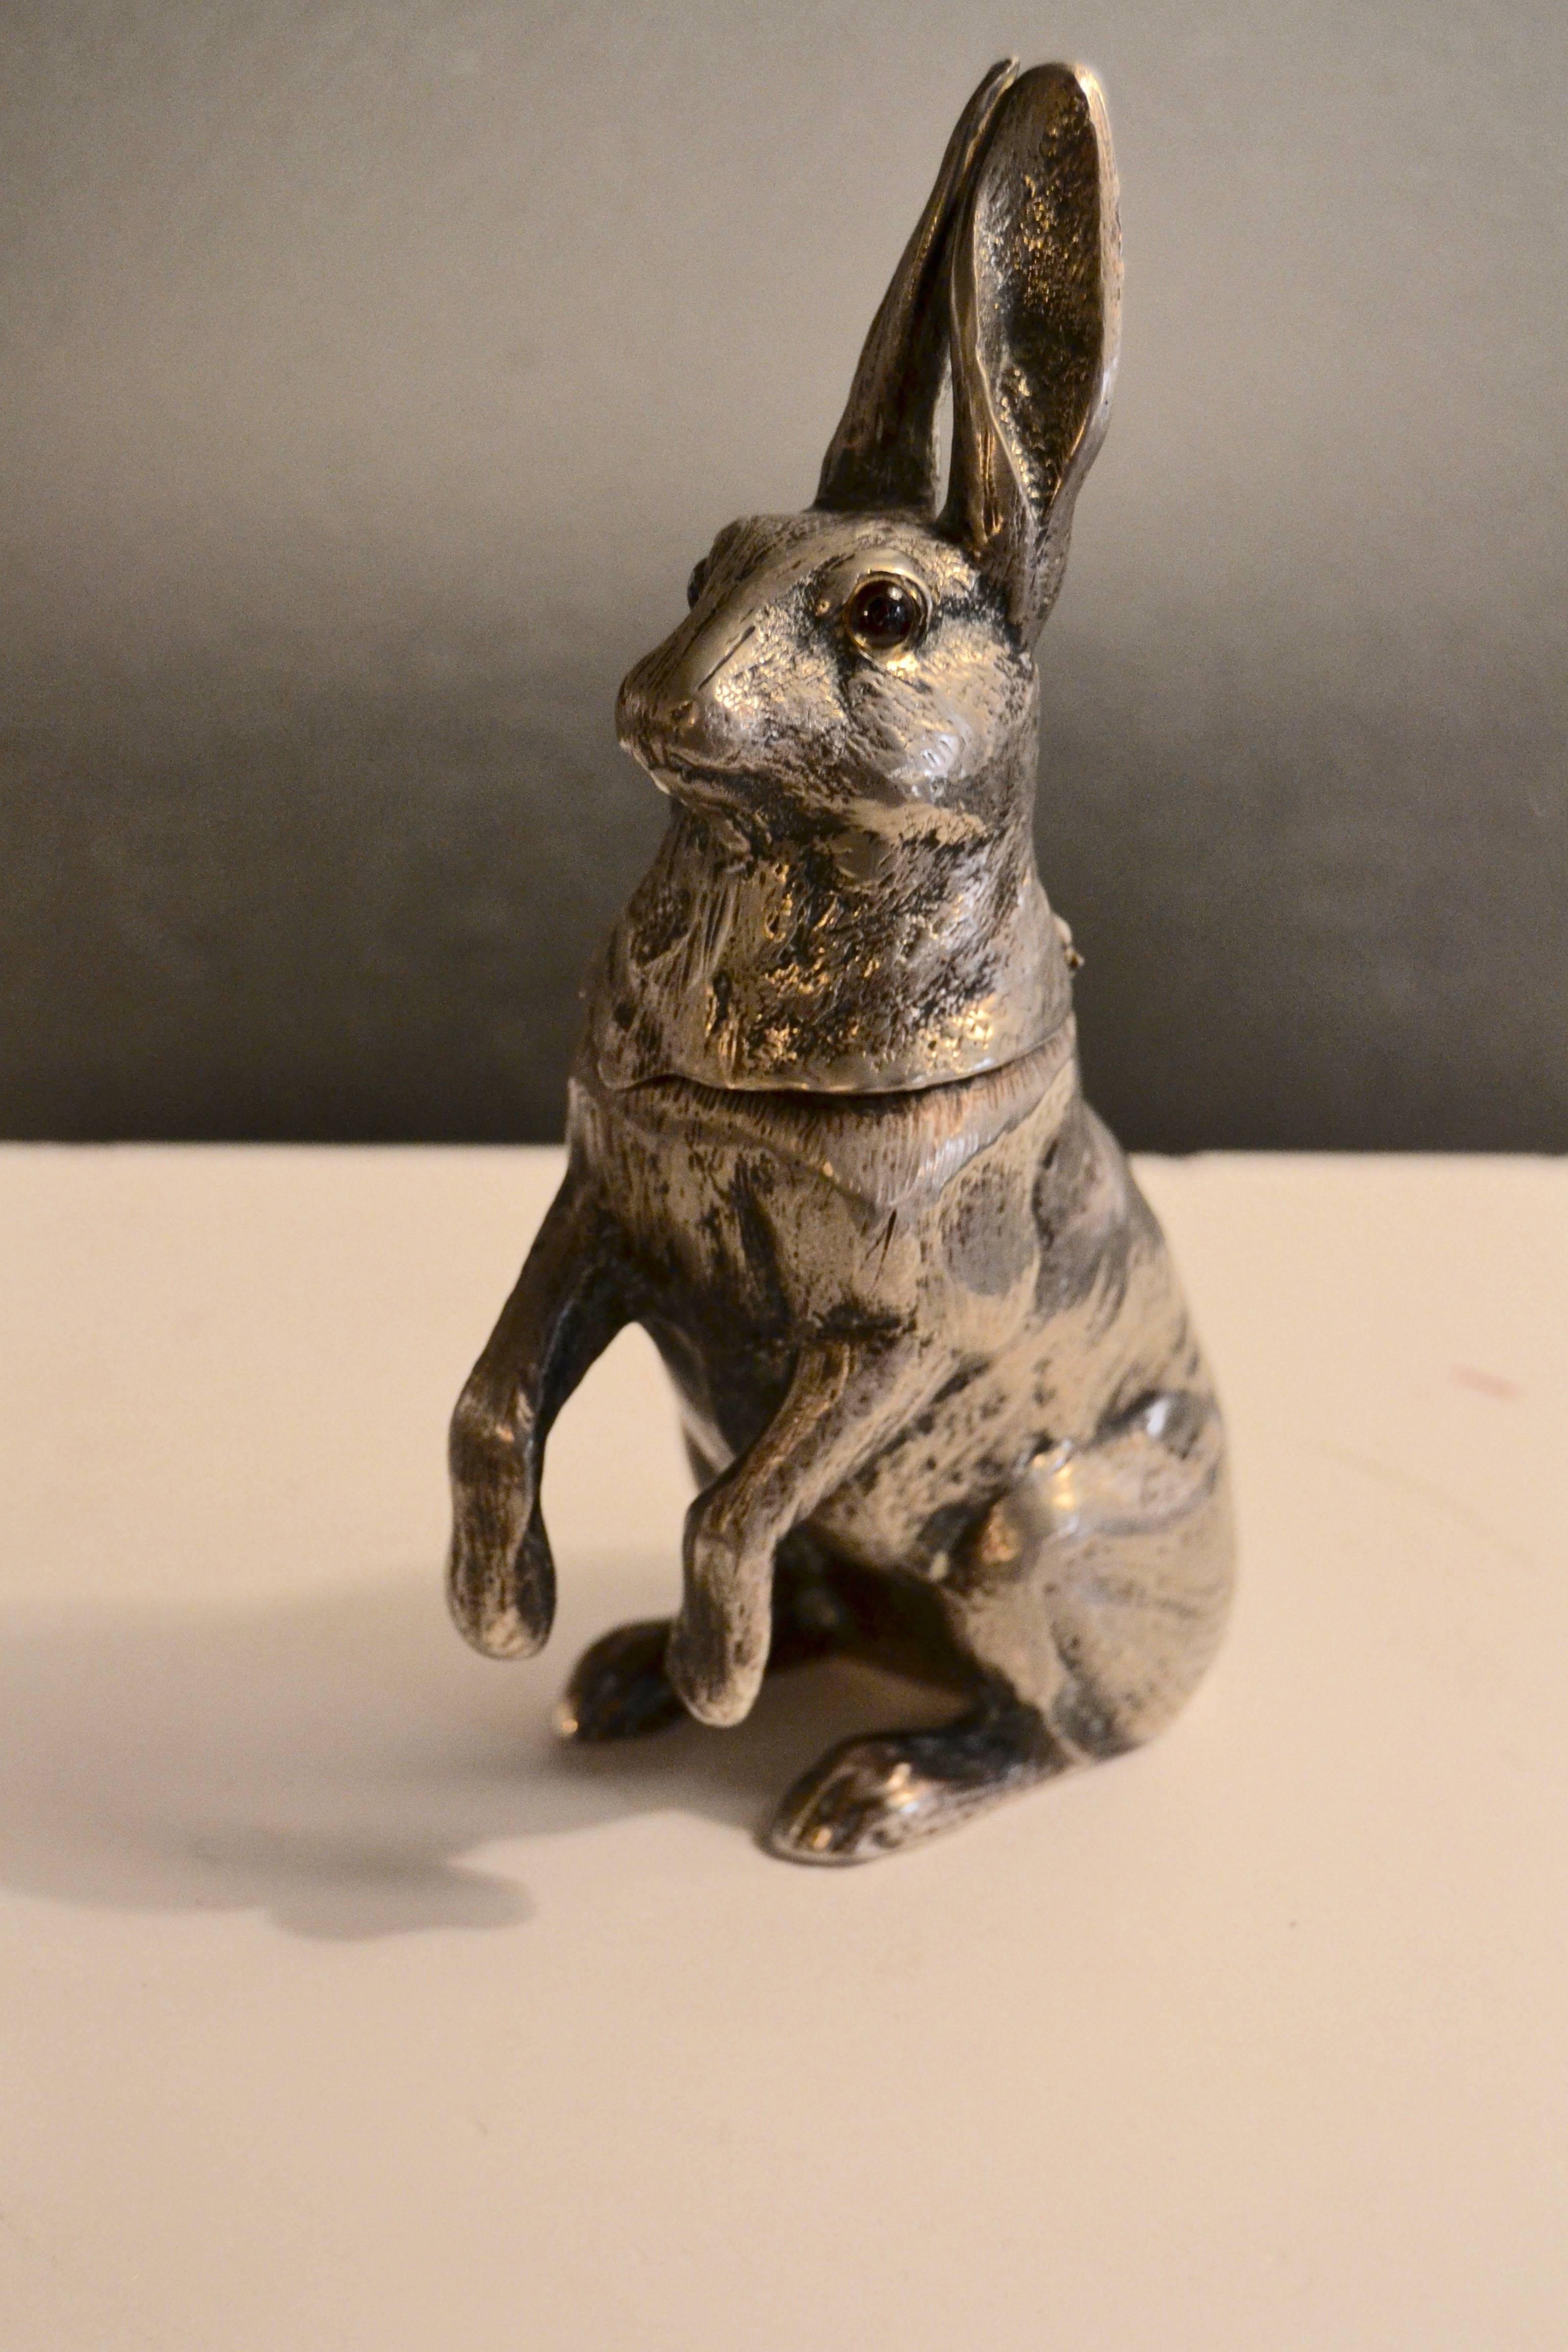 Decorative XX century inkwell or box representing a silver plated hare.